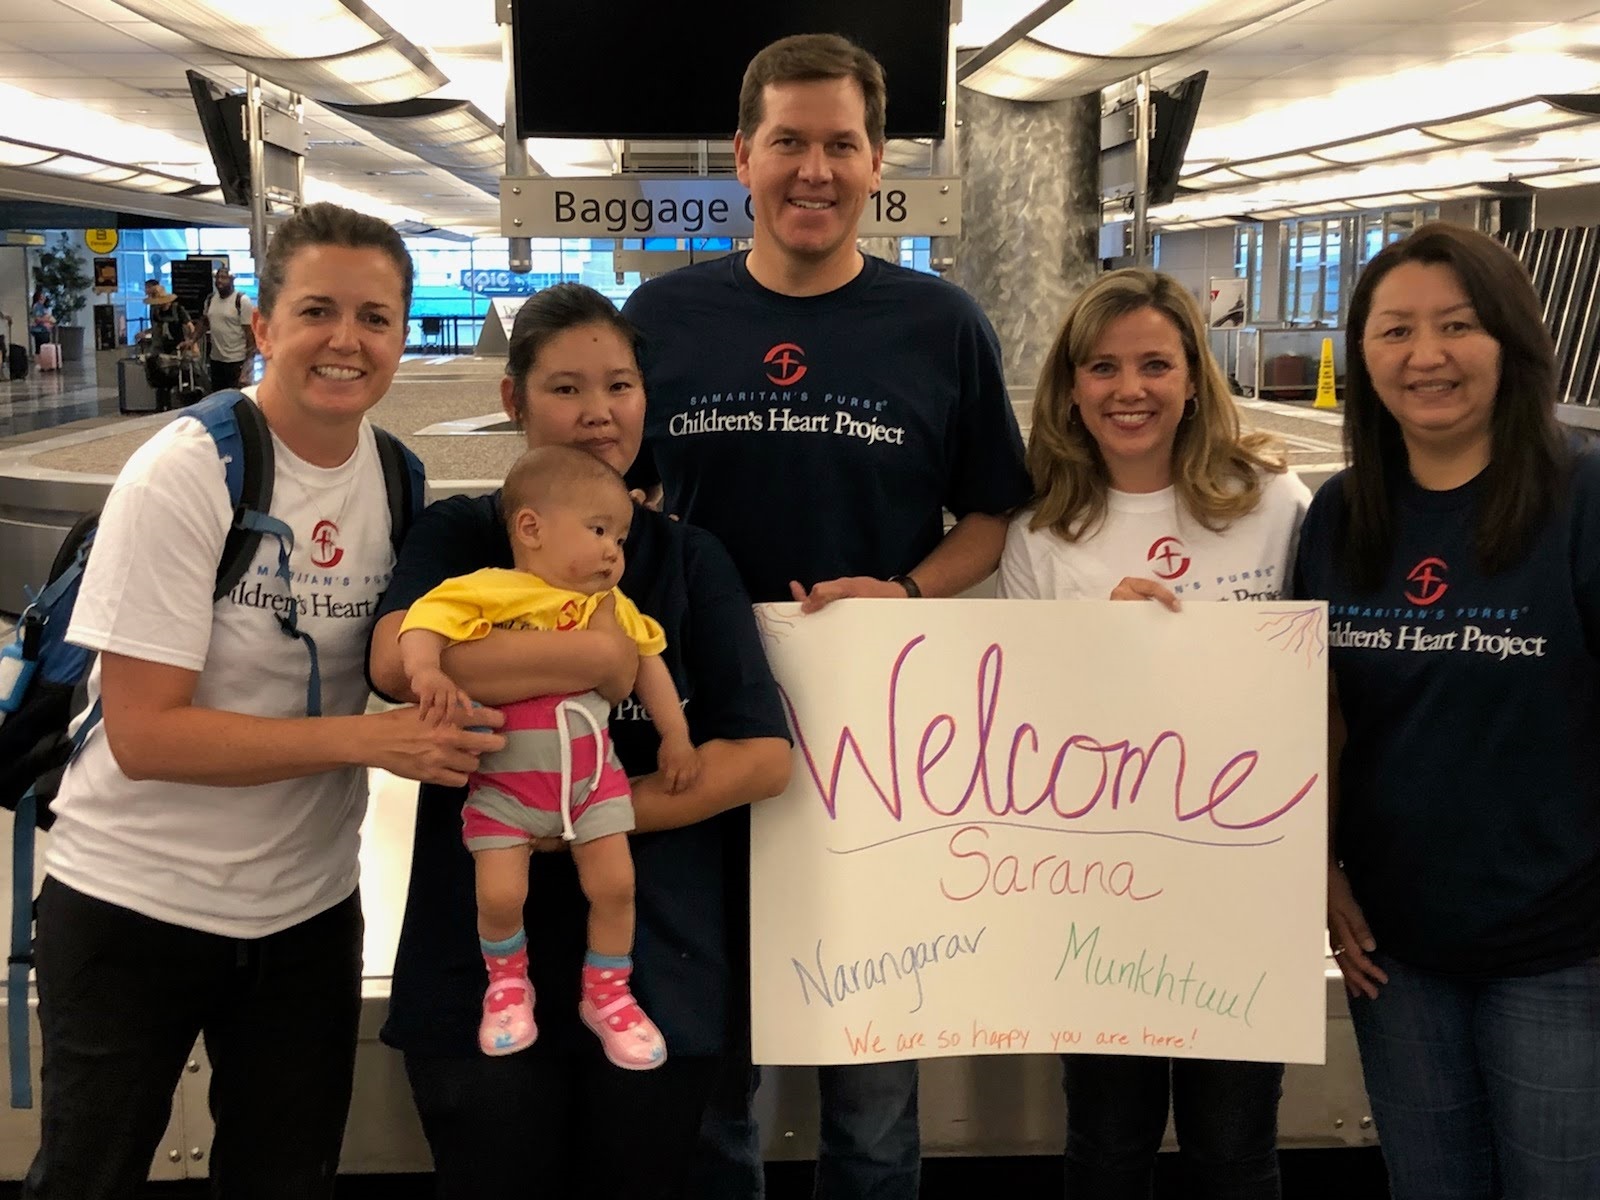 Five adults and a baby at an airport with a welcome sign